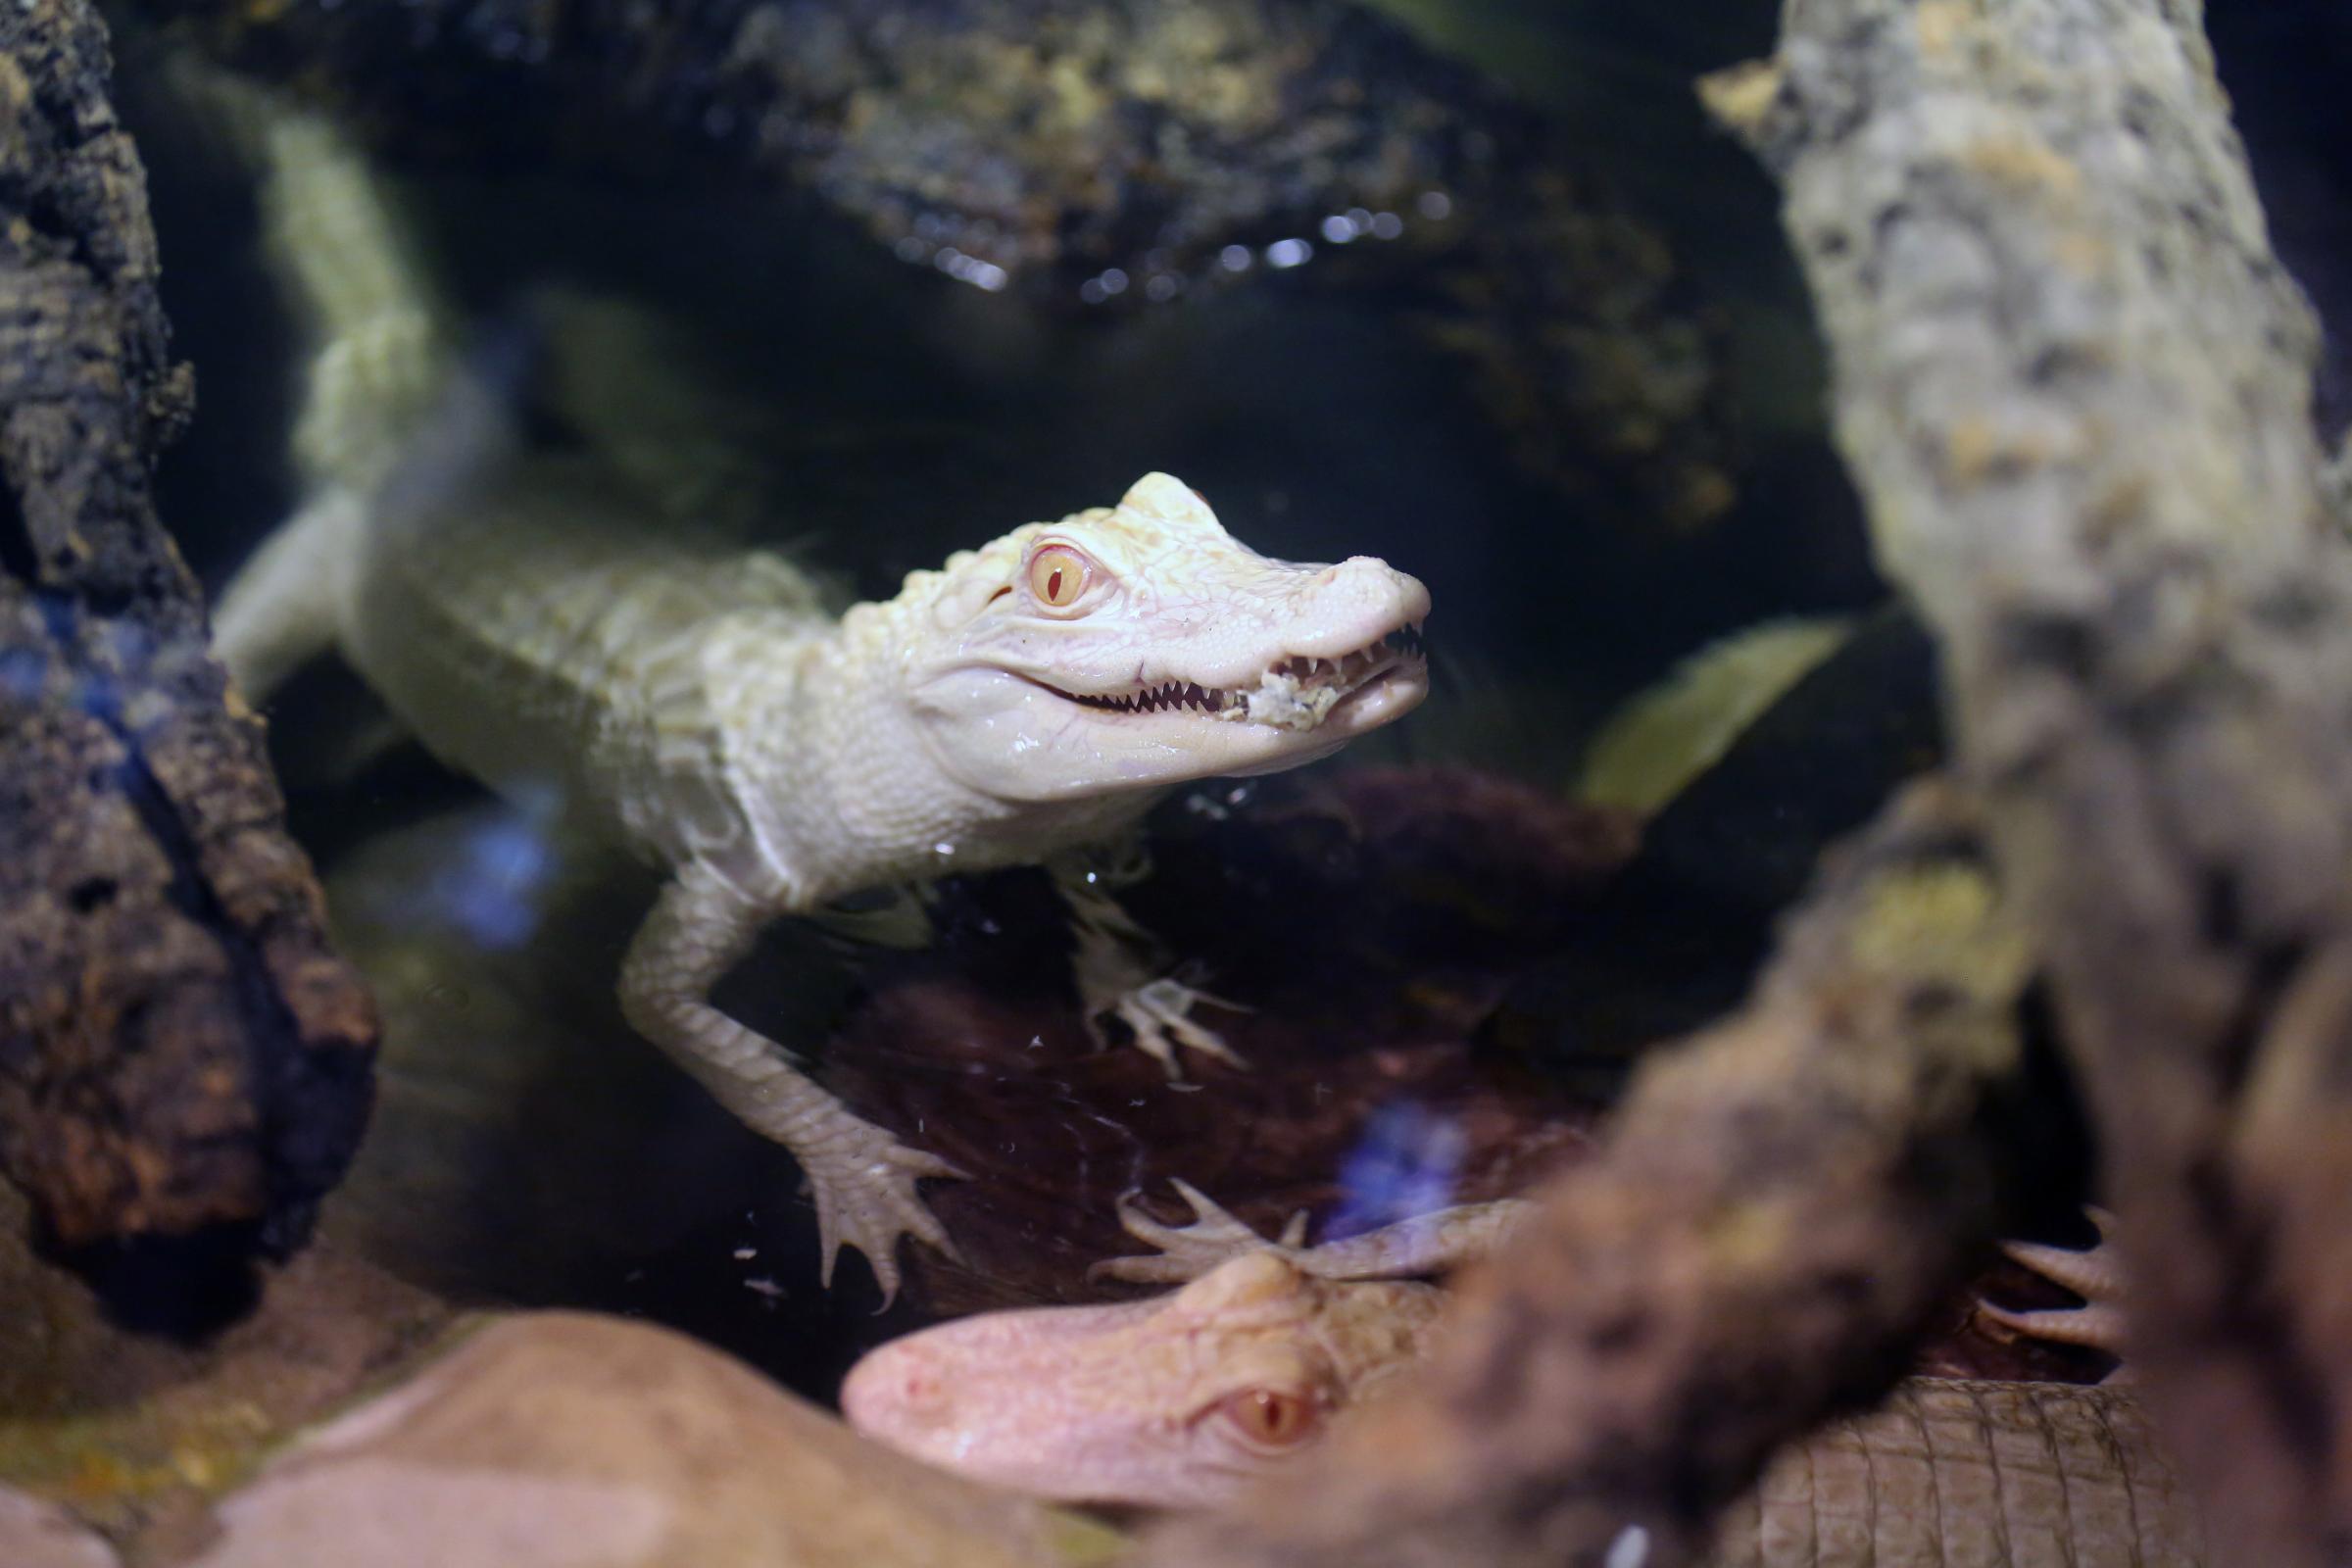 Two 18-month old albino alligators are presented at the tropical aquarium in Paris, Feb. 13. 2014. The two albino alligators arrived in their new home in Paris on Wednesday Feb. 12, after travelling thousands of miles from a fish farm in Florida. The aquarium's new lodgers are two of only twenty to thirty in the world, according to the director of the tropical aquarium Michel Hignette.